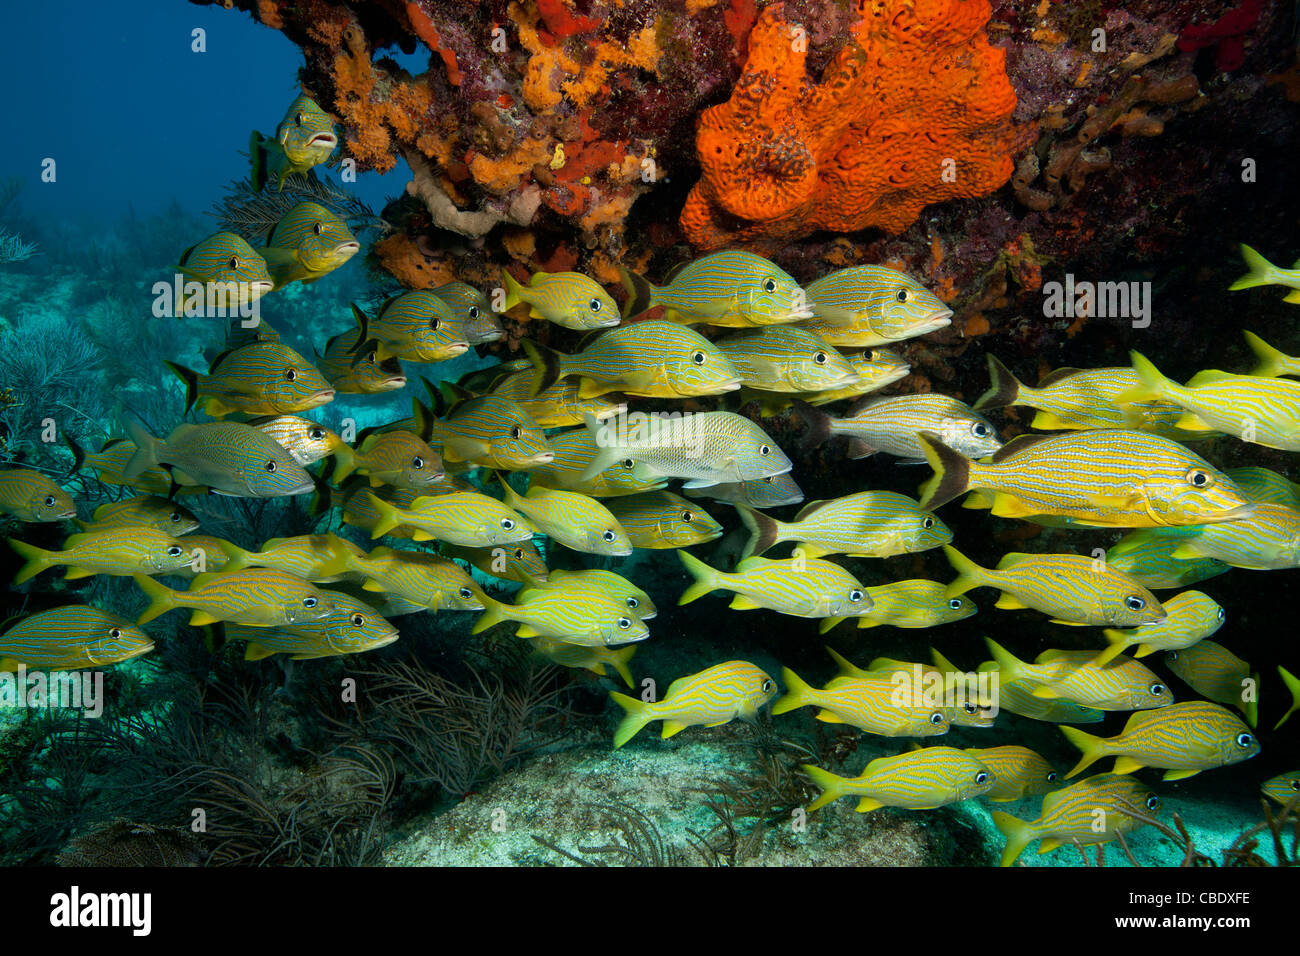 Schooling fish congregate on a reef in the Florida Keys National Marine Sanctuary. Stock Photo